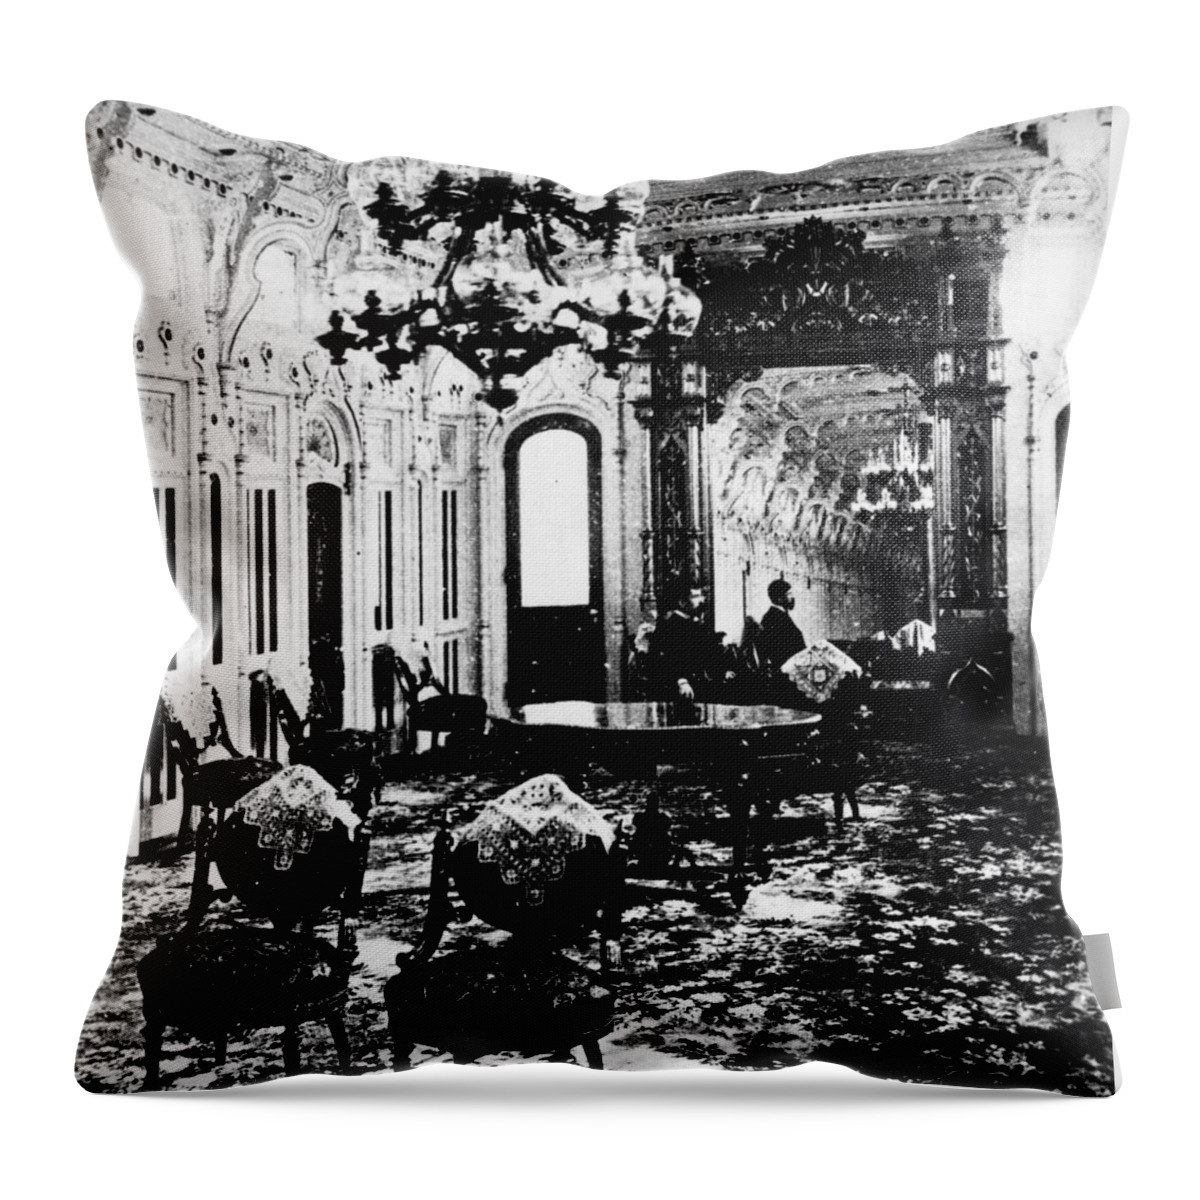 1878 Throw Pillow featuring the photograph Steamboat Interior, 1878 by Granger